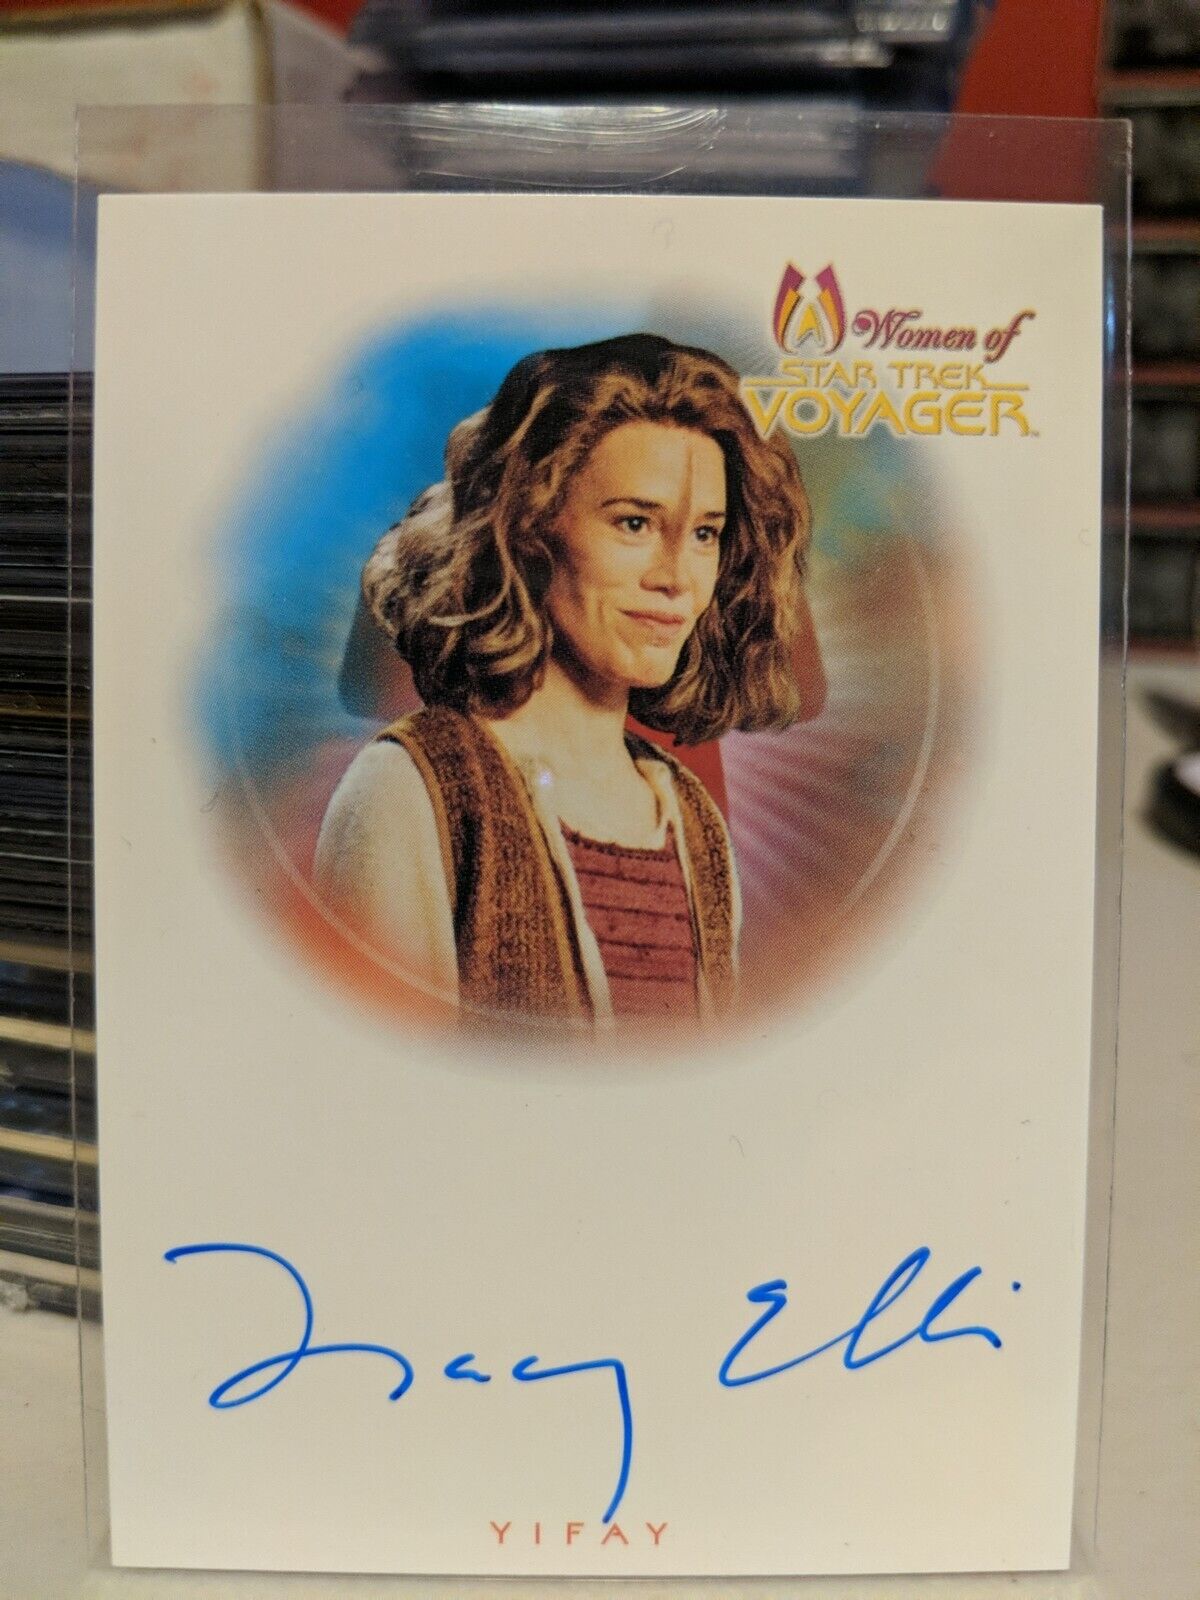 Women Of Star Trek Voyager Tracey Ellis A7 Autograph Card as Yifay 2001 NM 